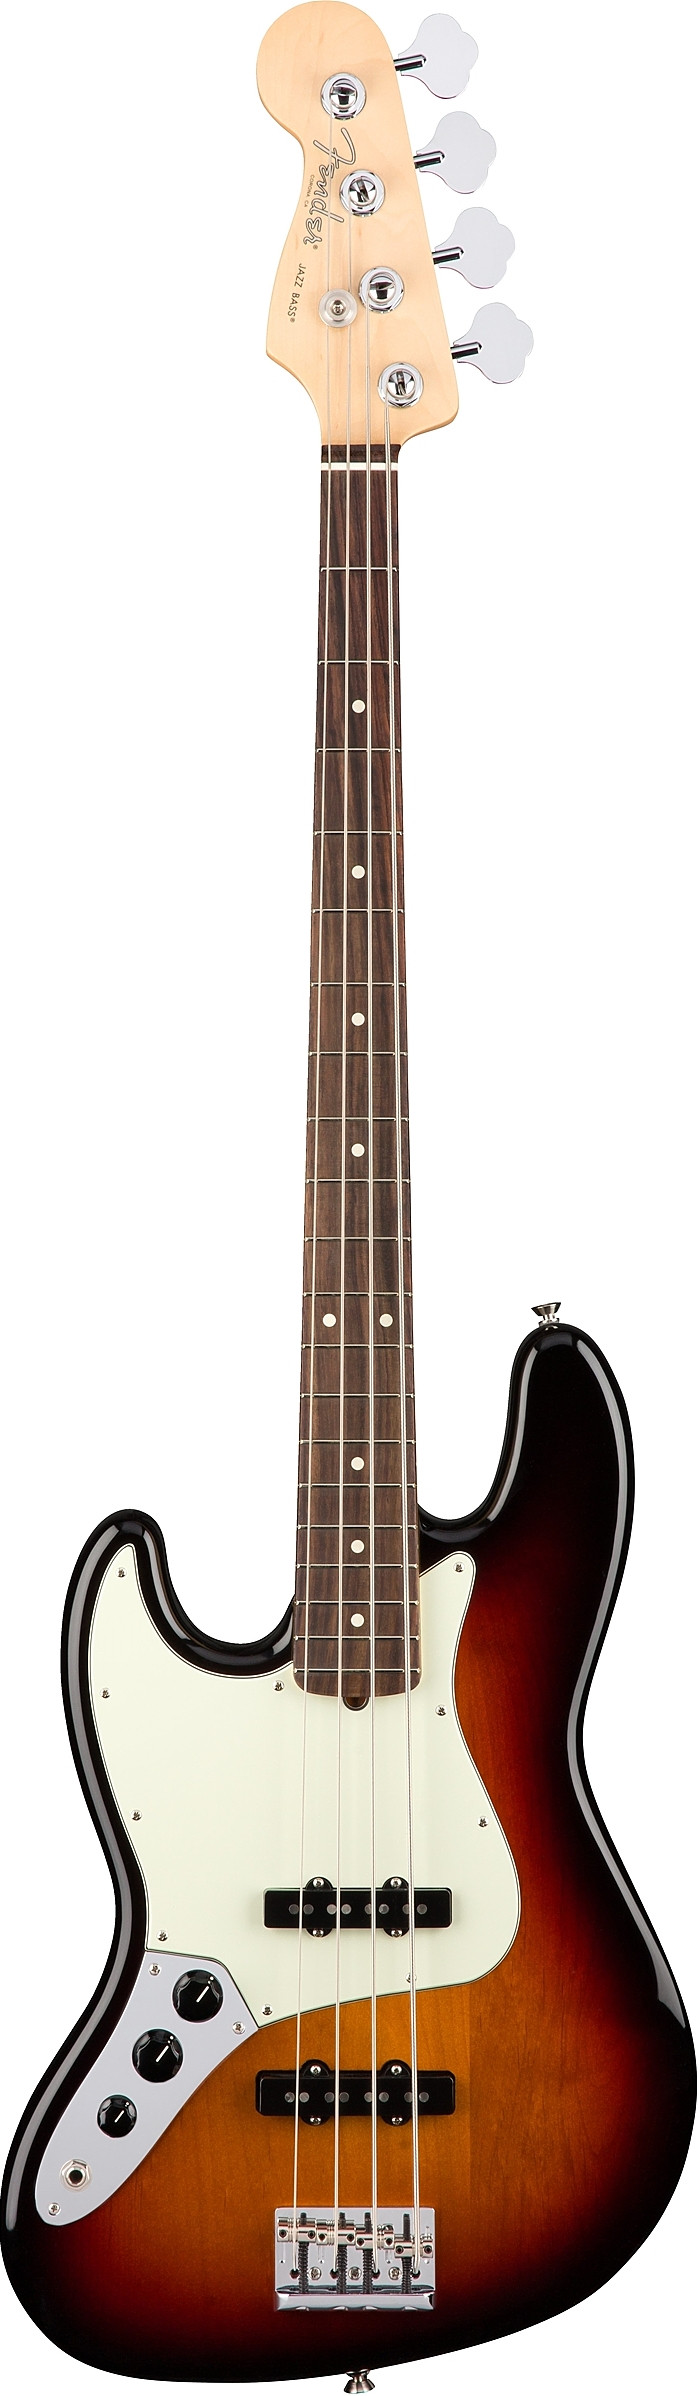 American Professional Jazz Bass Left Hand by Fender